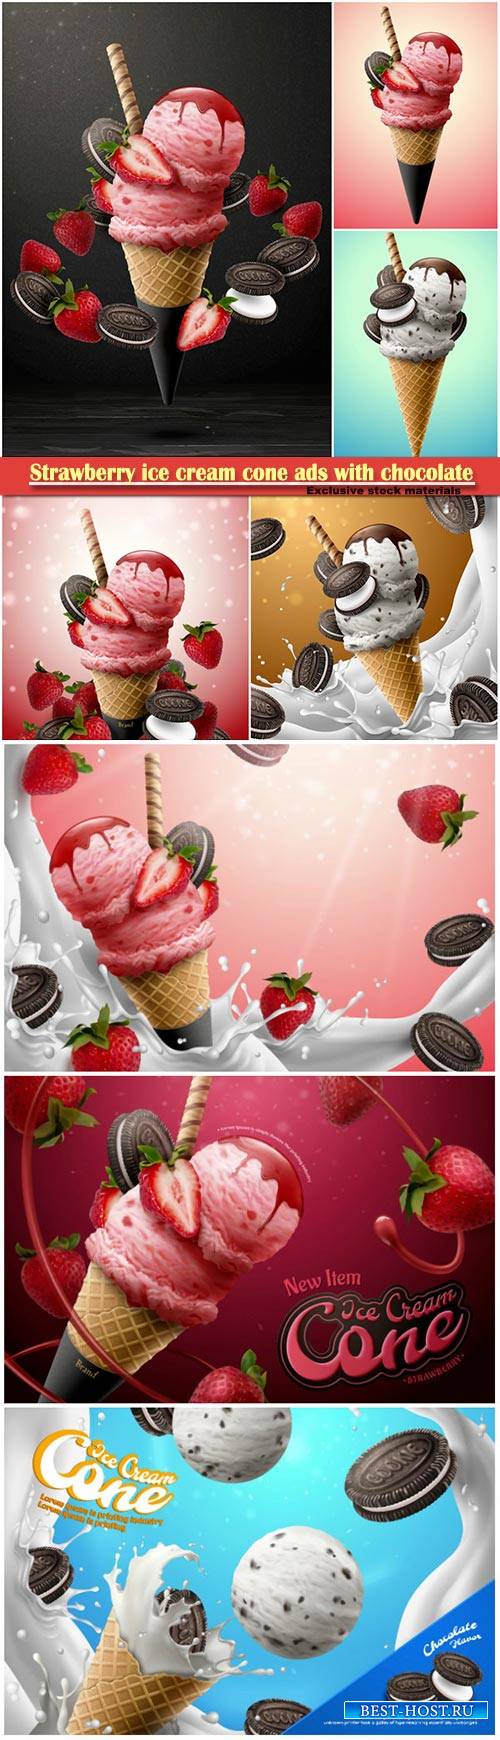 Strawberry ice cream cone ads with chocolate cookie and fresh fruit on glit ...